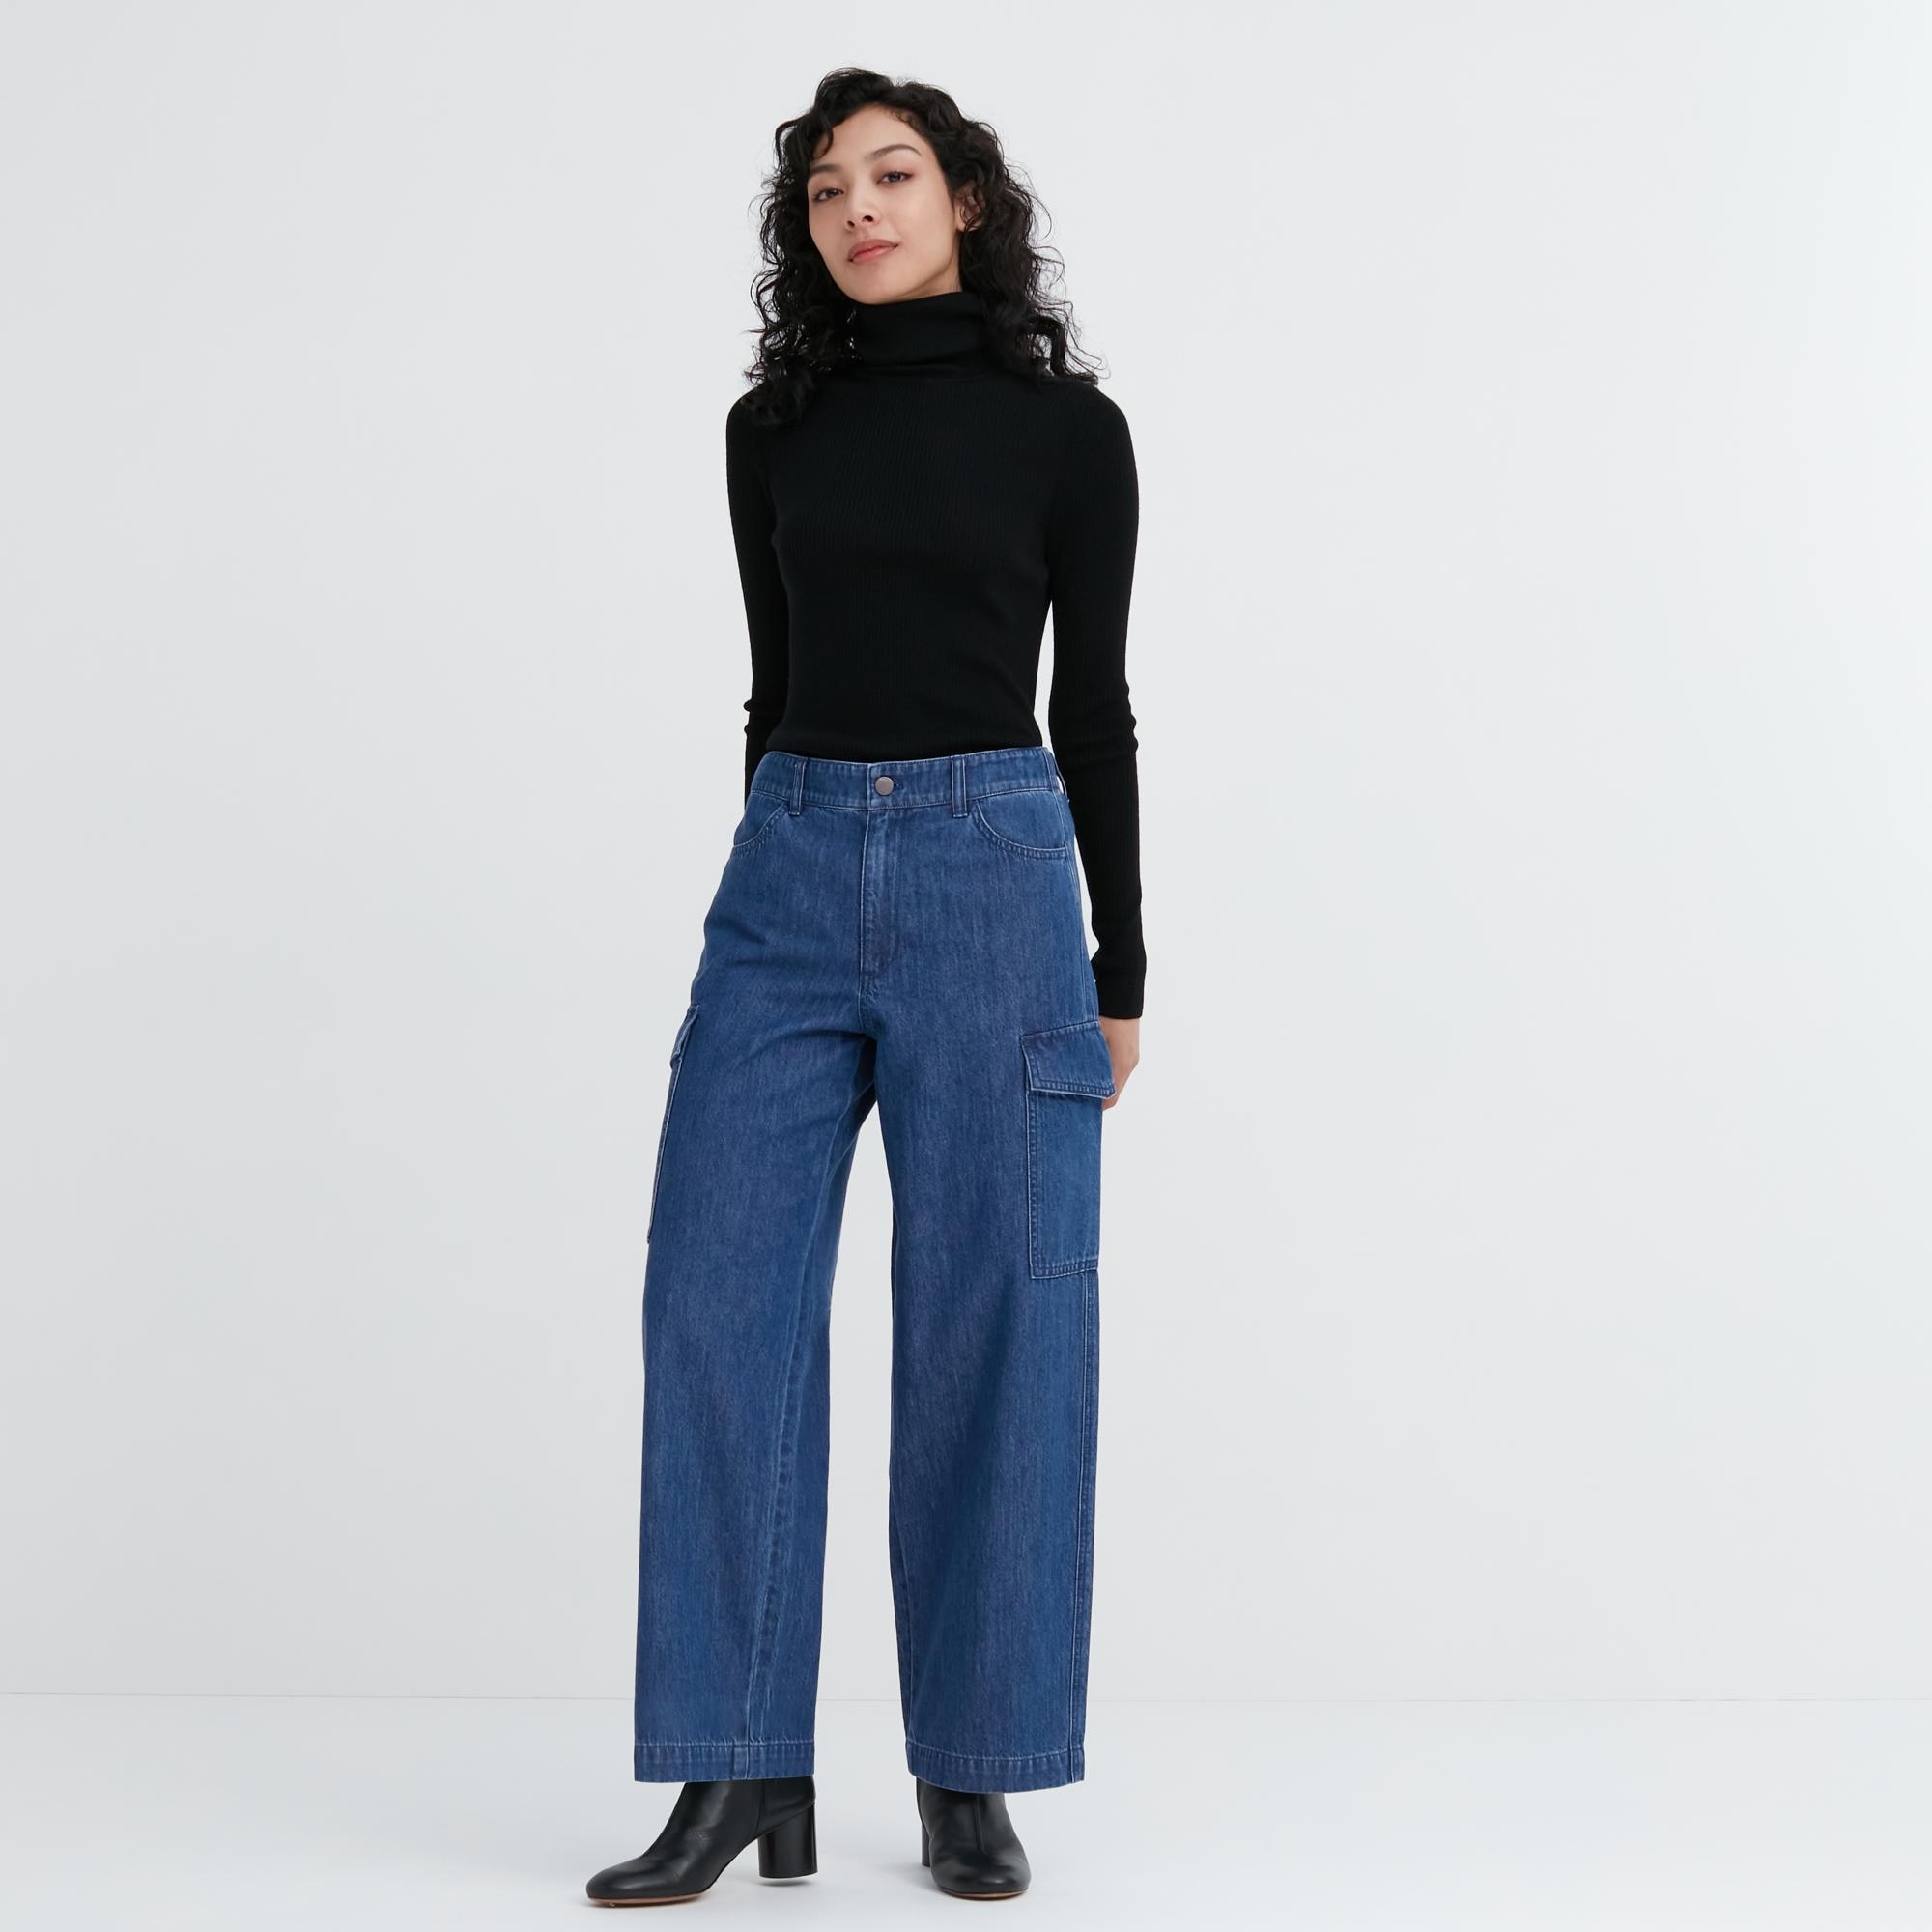 Palazzo Knee Cut Denim High Waisted Flare Jeans With Wide Leg And Broken  Design For Women Ripped, Flare, Aesthetic, And Big Hole Fit 211129 From  Long01, $27.78 | DHgate.Com